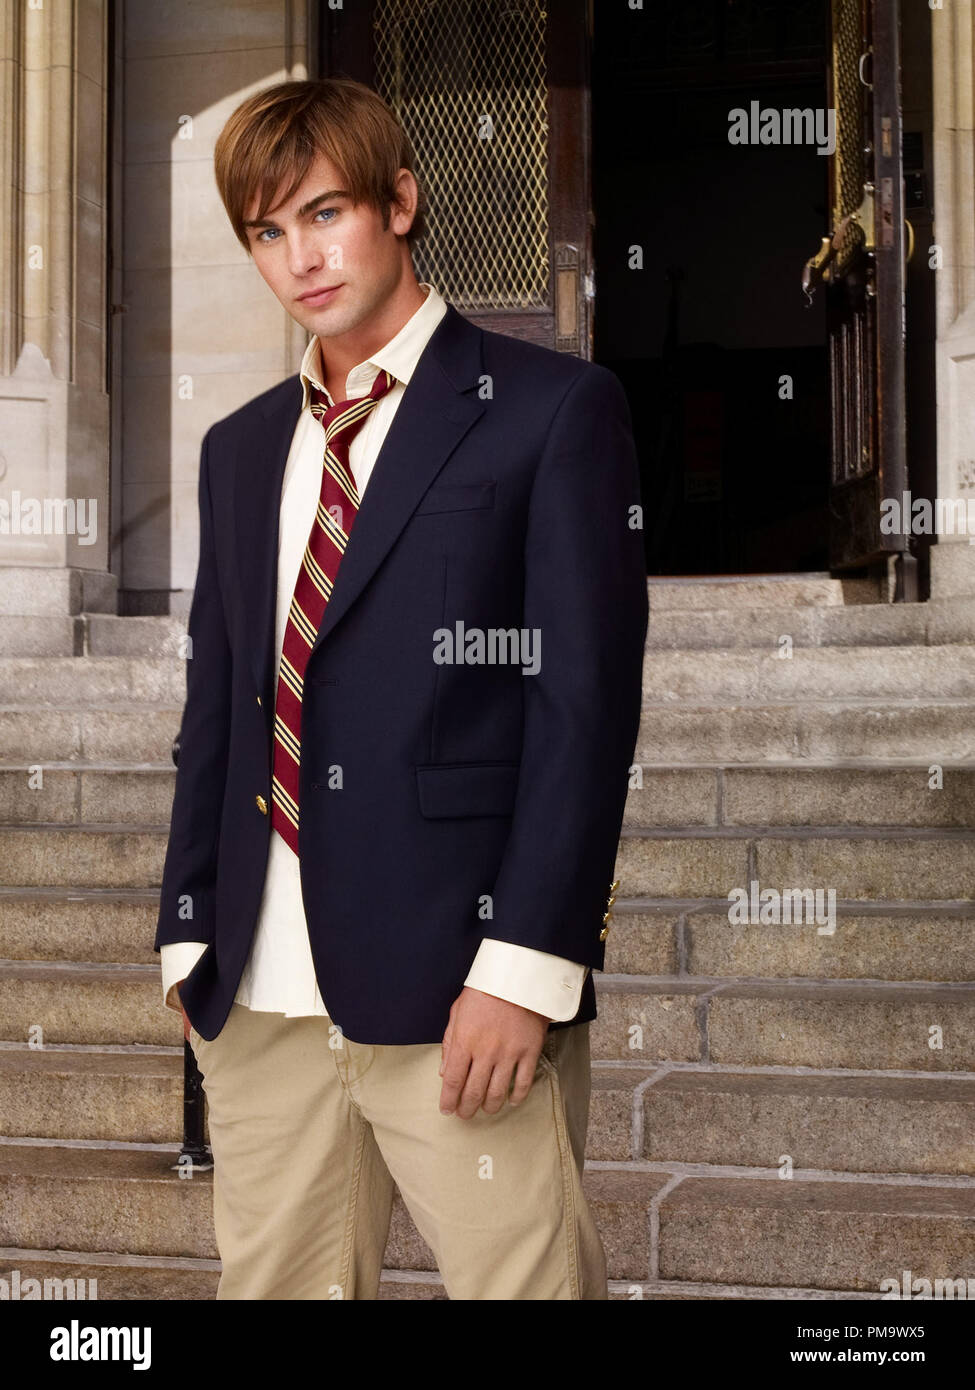 Gossip Girl Pictured: Chace Crawford as Nate Photo Credit: Andrew